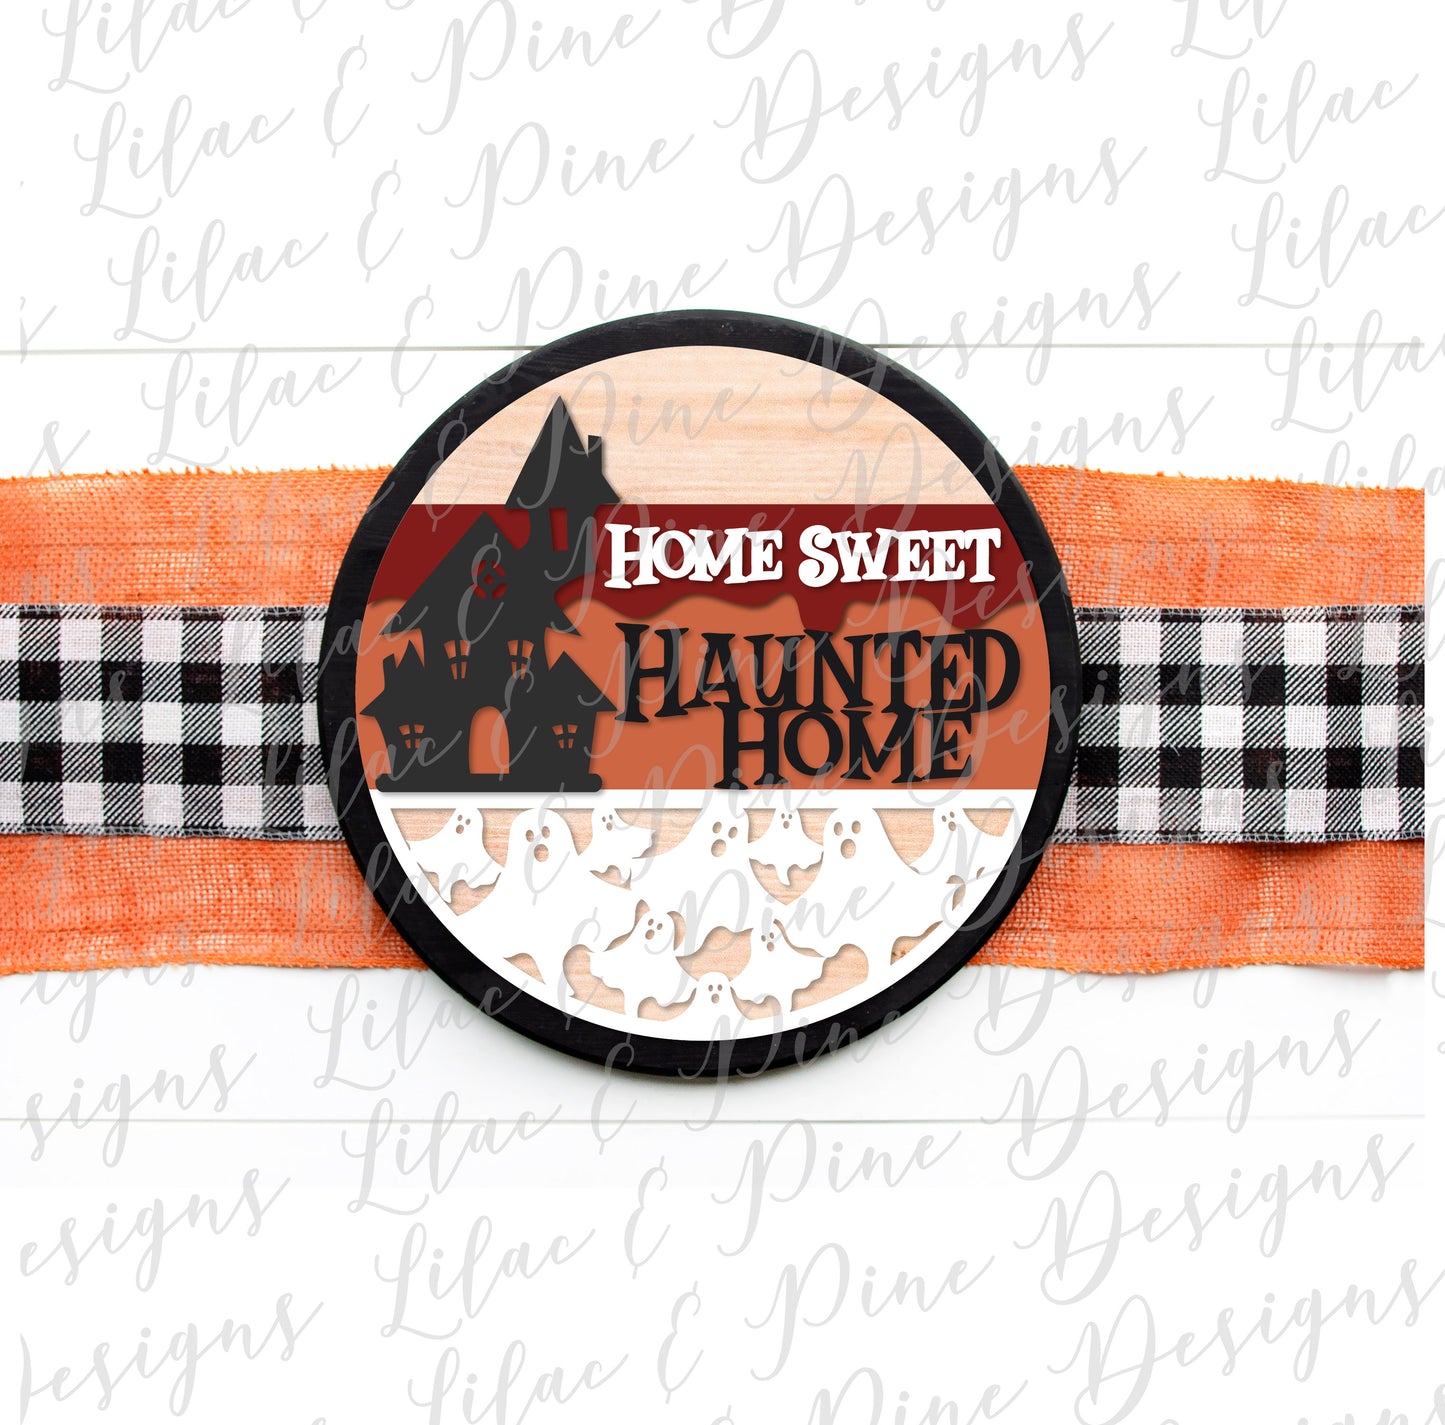 Home Sweet Haunted Home Sign SVG, Halloween Welcome SVG, Spooky SVG, Ghost SVG, Haunted House Door Round, Happy Halloween SVG, Halloween decor, laser cut file, Glowforge SVG